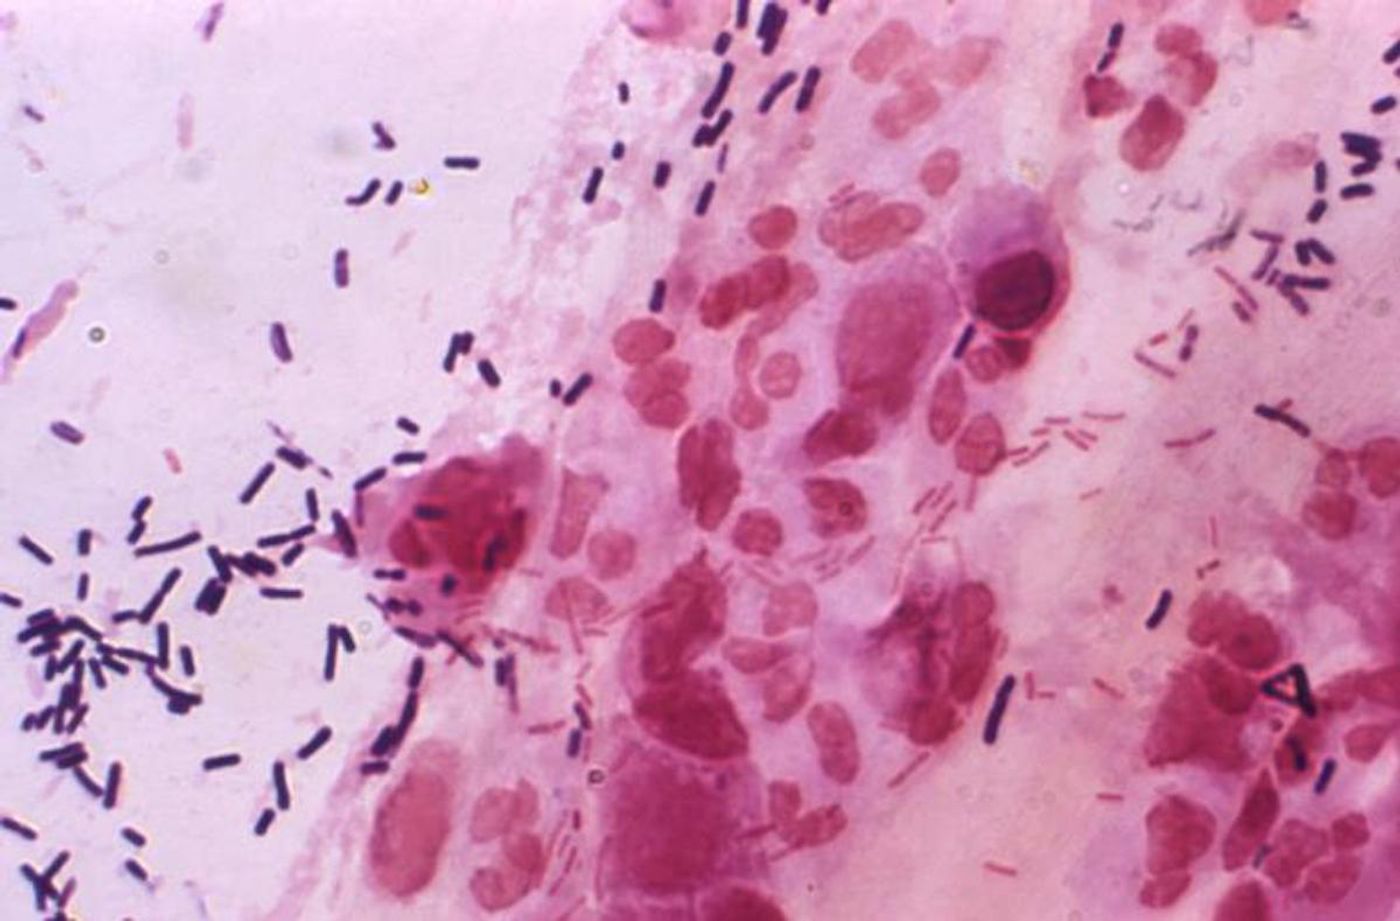 Normal bacterial flora - Gram-positive lactobacilli, and smaller, Gram-negative bacilli - and vaginal epithelial cells are seen in this Gram-stained vaginal smear specimen / Credit: CDC / Joe Miller